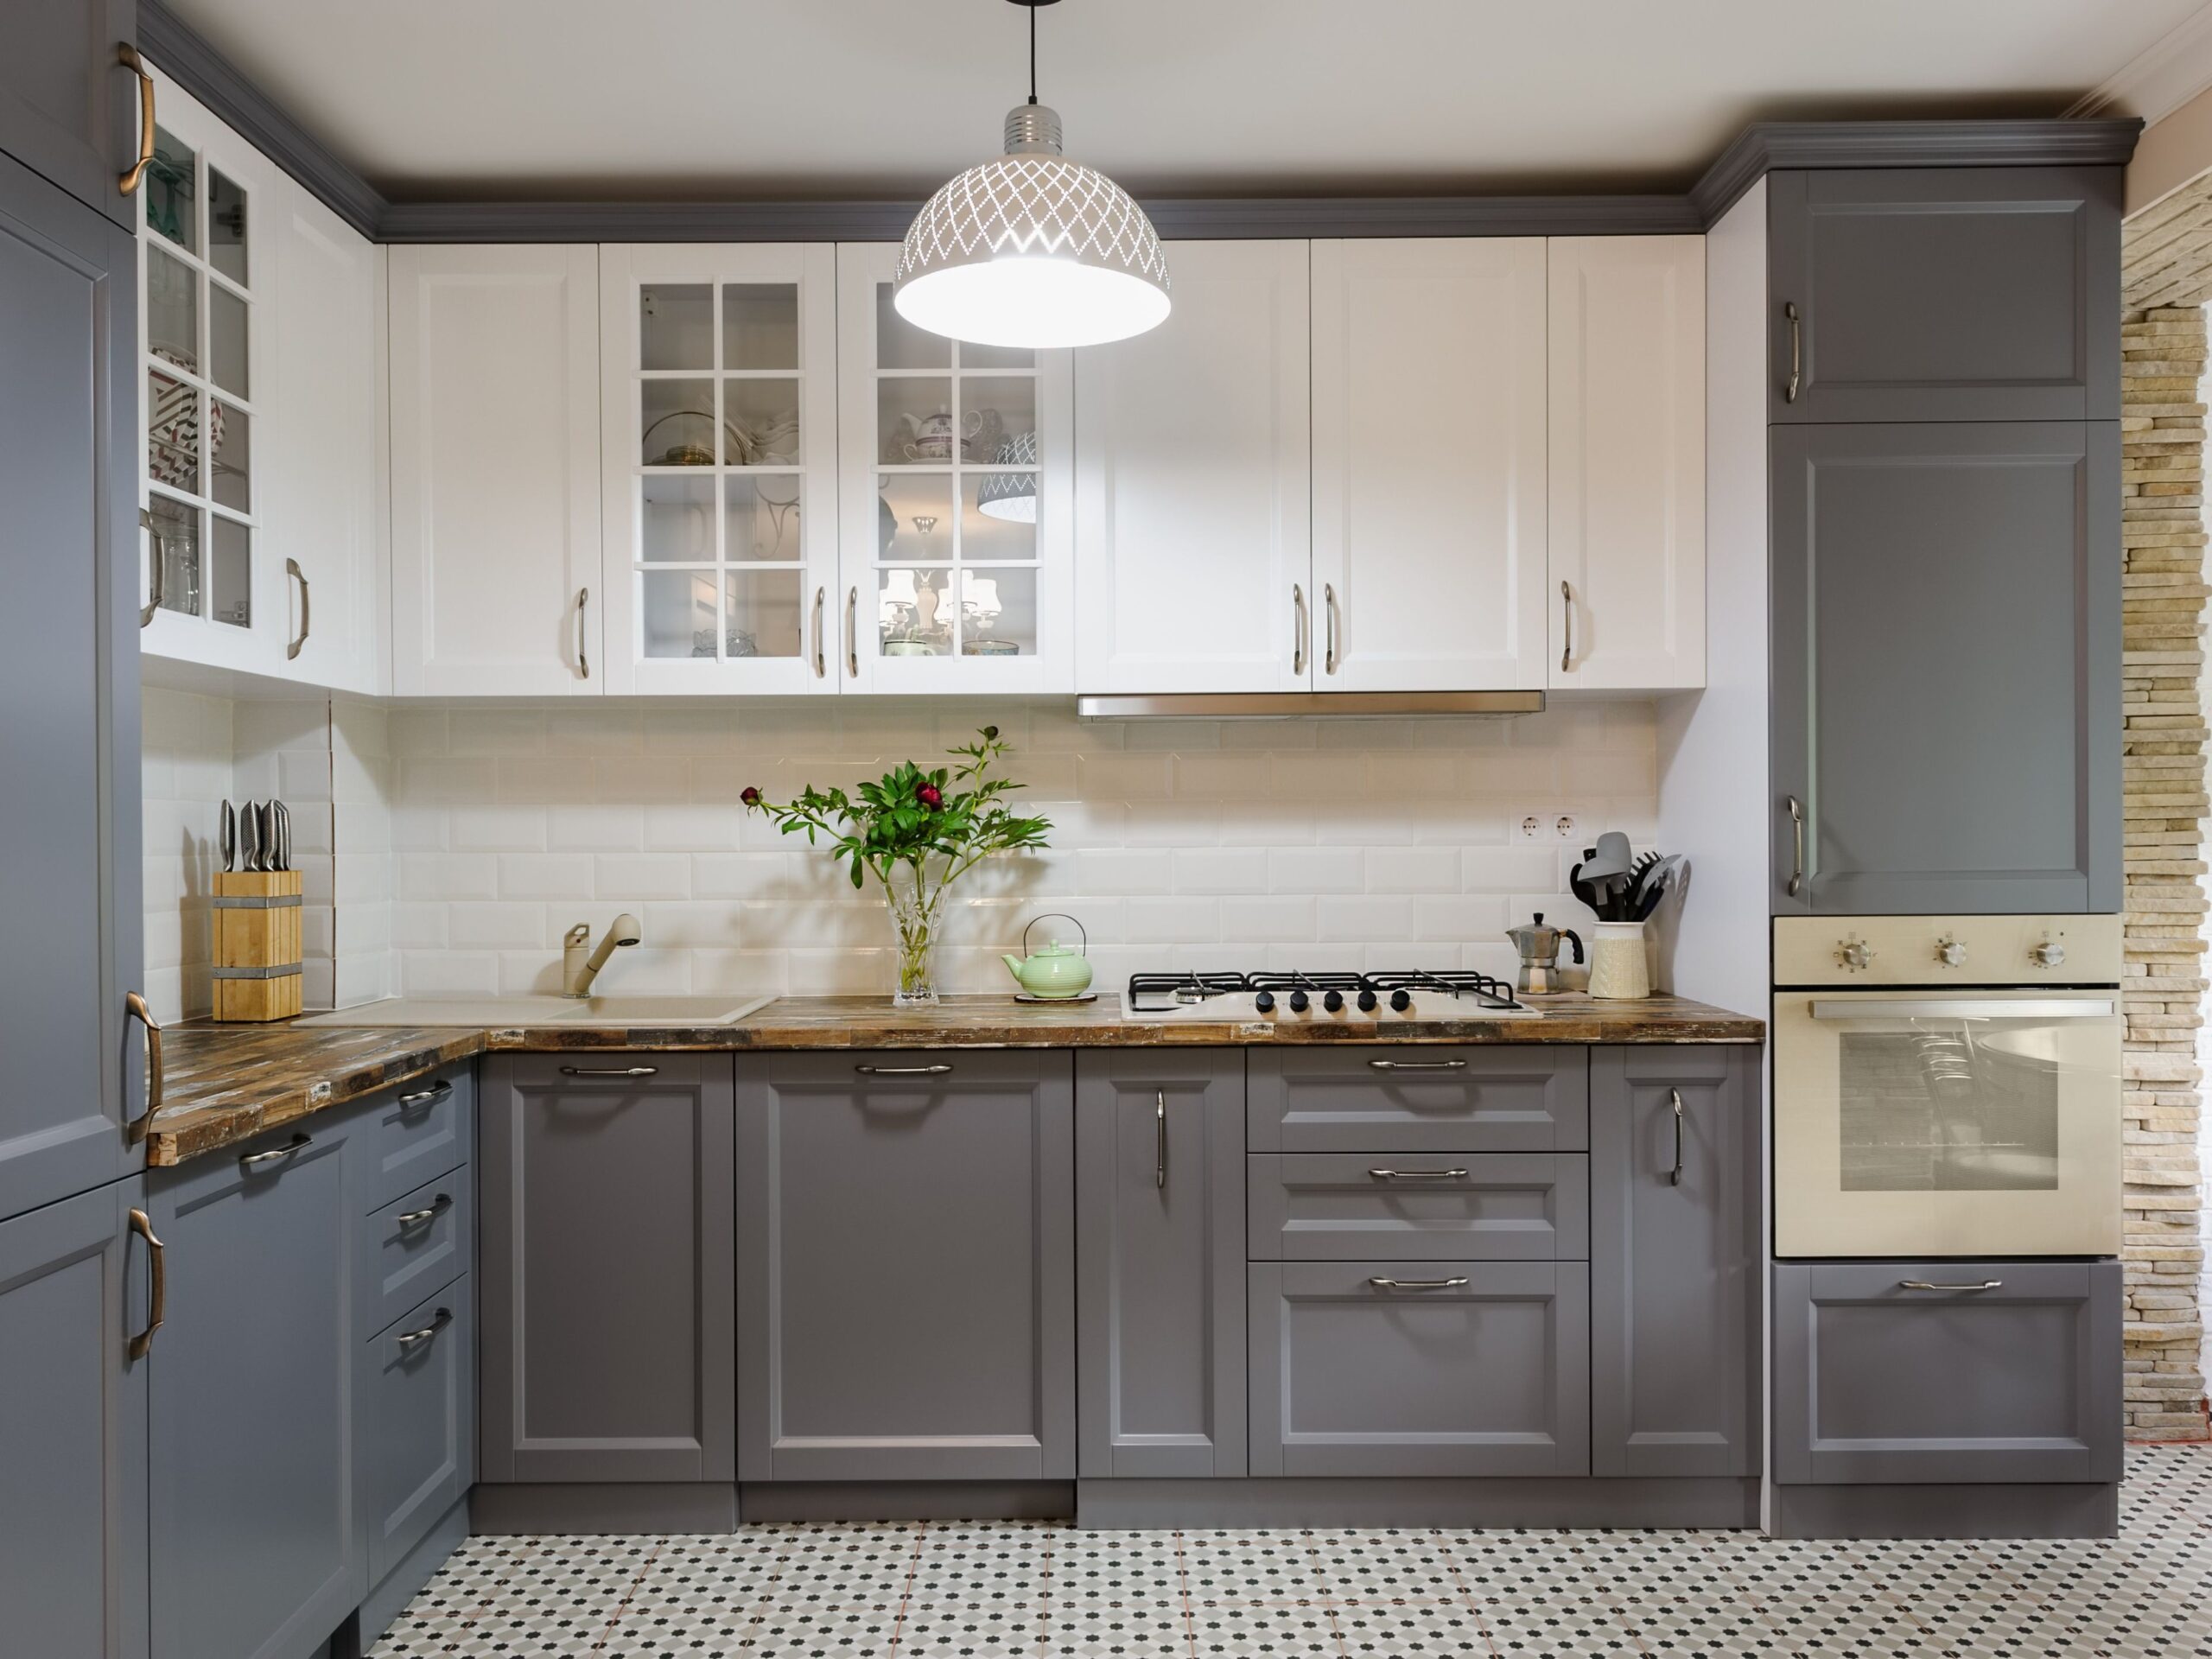 What Is a Base Cabinet? - grey lower kitchen cabinets